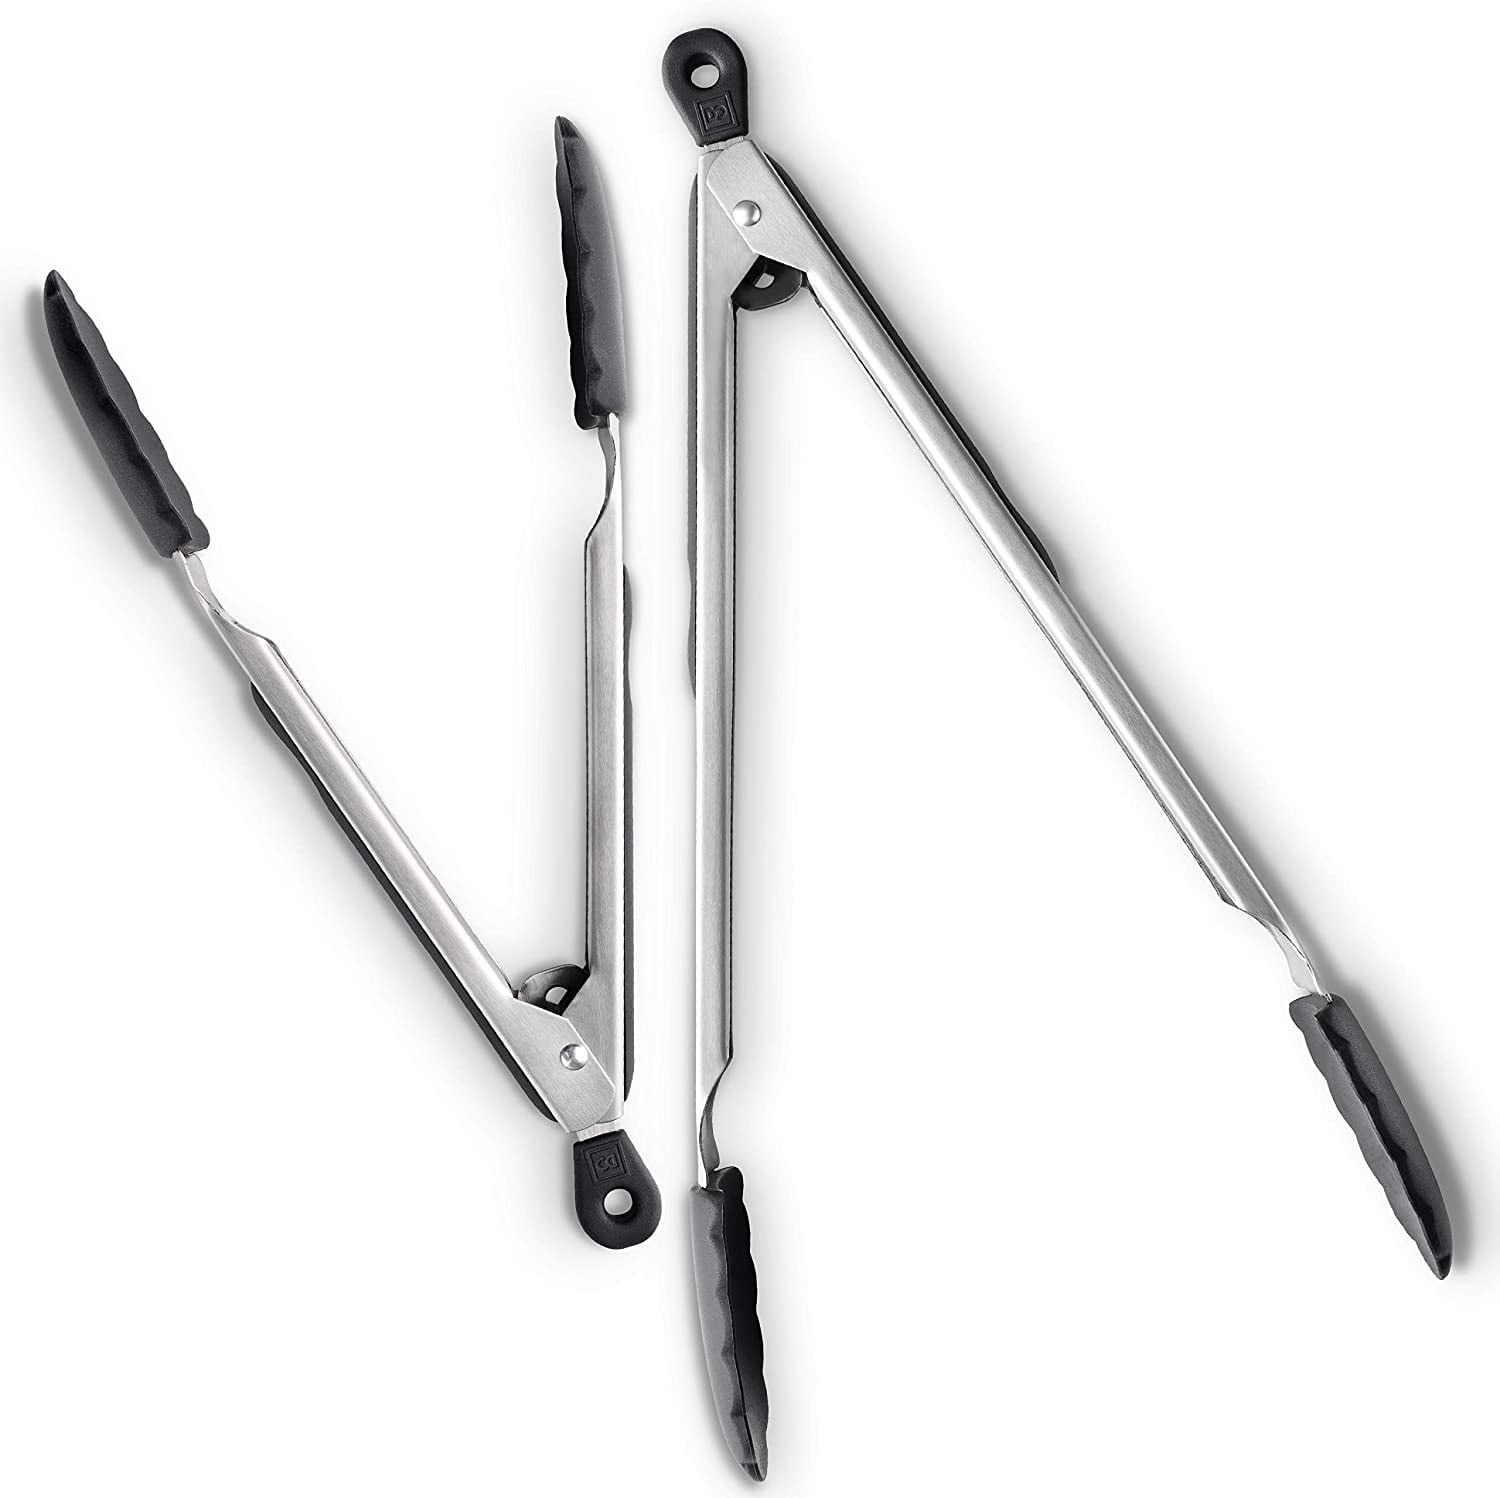 Zulay Kitchen 2 Pack 9 inch & 12 inch Tongs with Silicone Tips - Stainless Steel - Silver - Gray